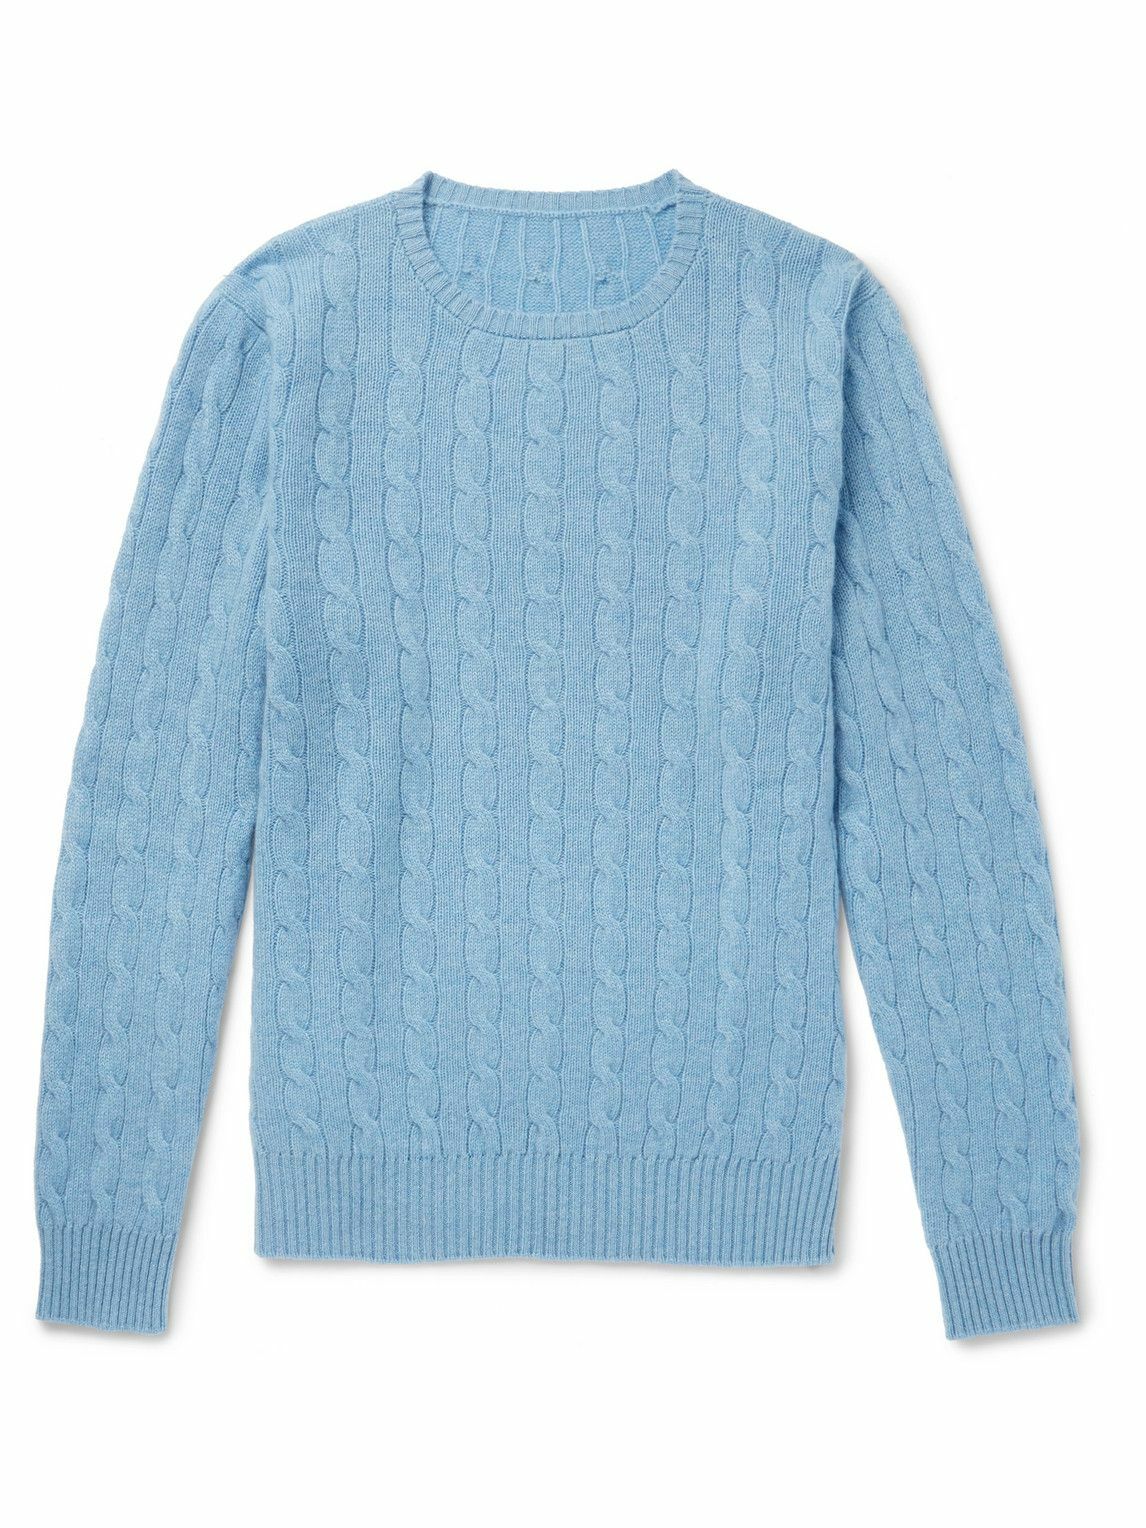 Anderson & Sheppard - Cable-Knit Cashmere Sweater - Blue Anderson ...